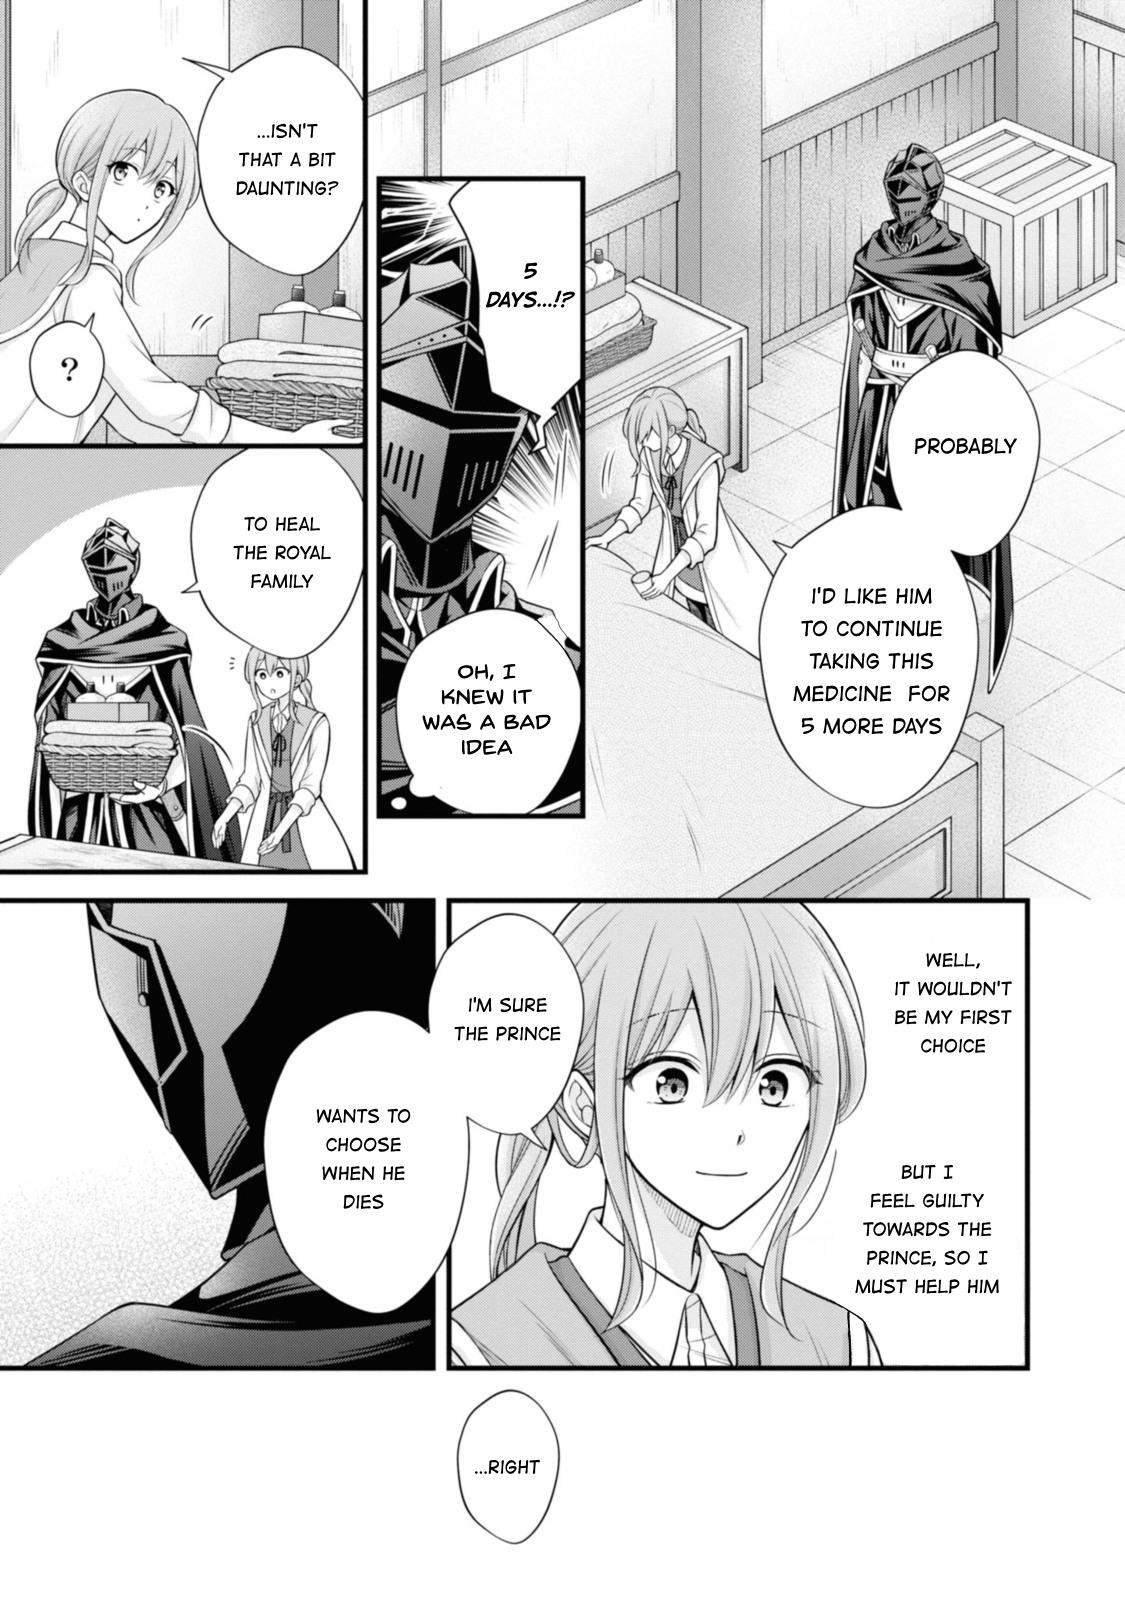 Lady Healer With Zero Luck With Men. Her First Love, A Black Knight, Is Now Her Unchosen Fiancé Chapter 1 #39